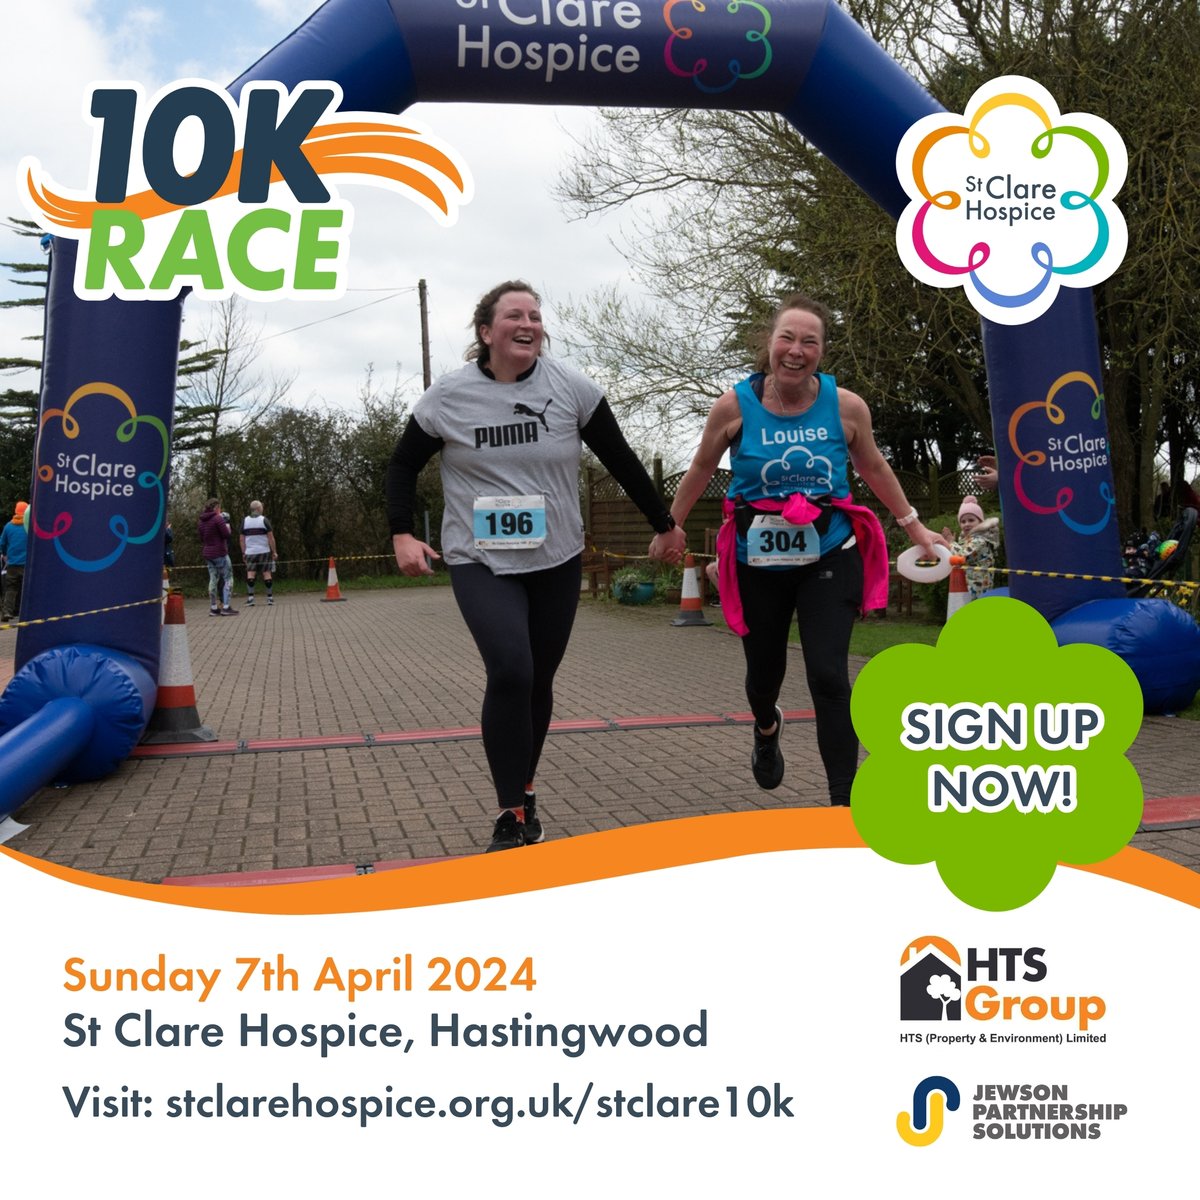 📣 ONE MONTH LEFT! It's crunch time for people who want to sign up for the #StClare10K as remaining spaces are going, going, nearly gone! 👀 Sunday 7th April 2024 | 10.30am start | #Hastingwood, #Essex Don't miss out, sign up now: bit.ly/3S1HE2R